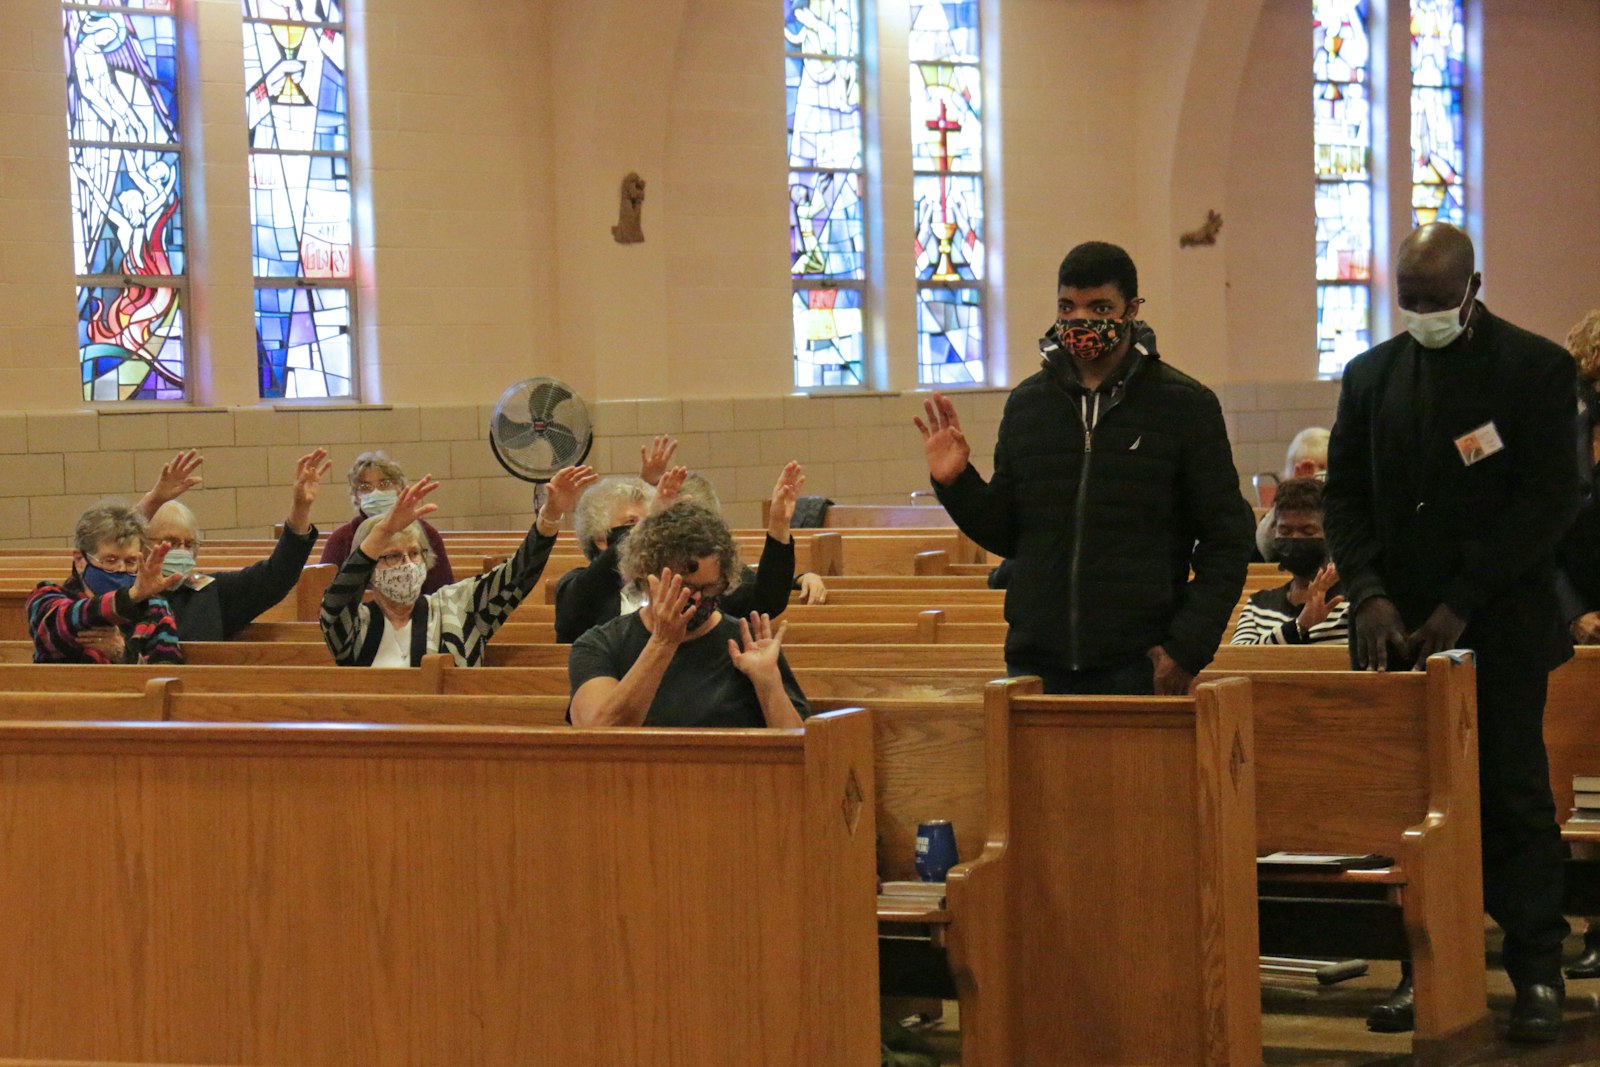 Members of the St. Suzanne/Our Lady Gate of Heaven Parish community extend their hands in charismatic prayer over the artists who took part in the "Celebrate Black Catholics and their Artists" series.